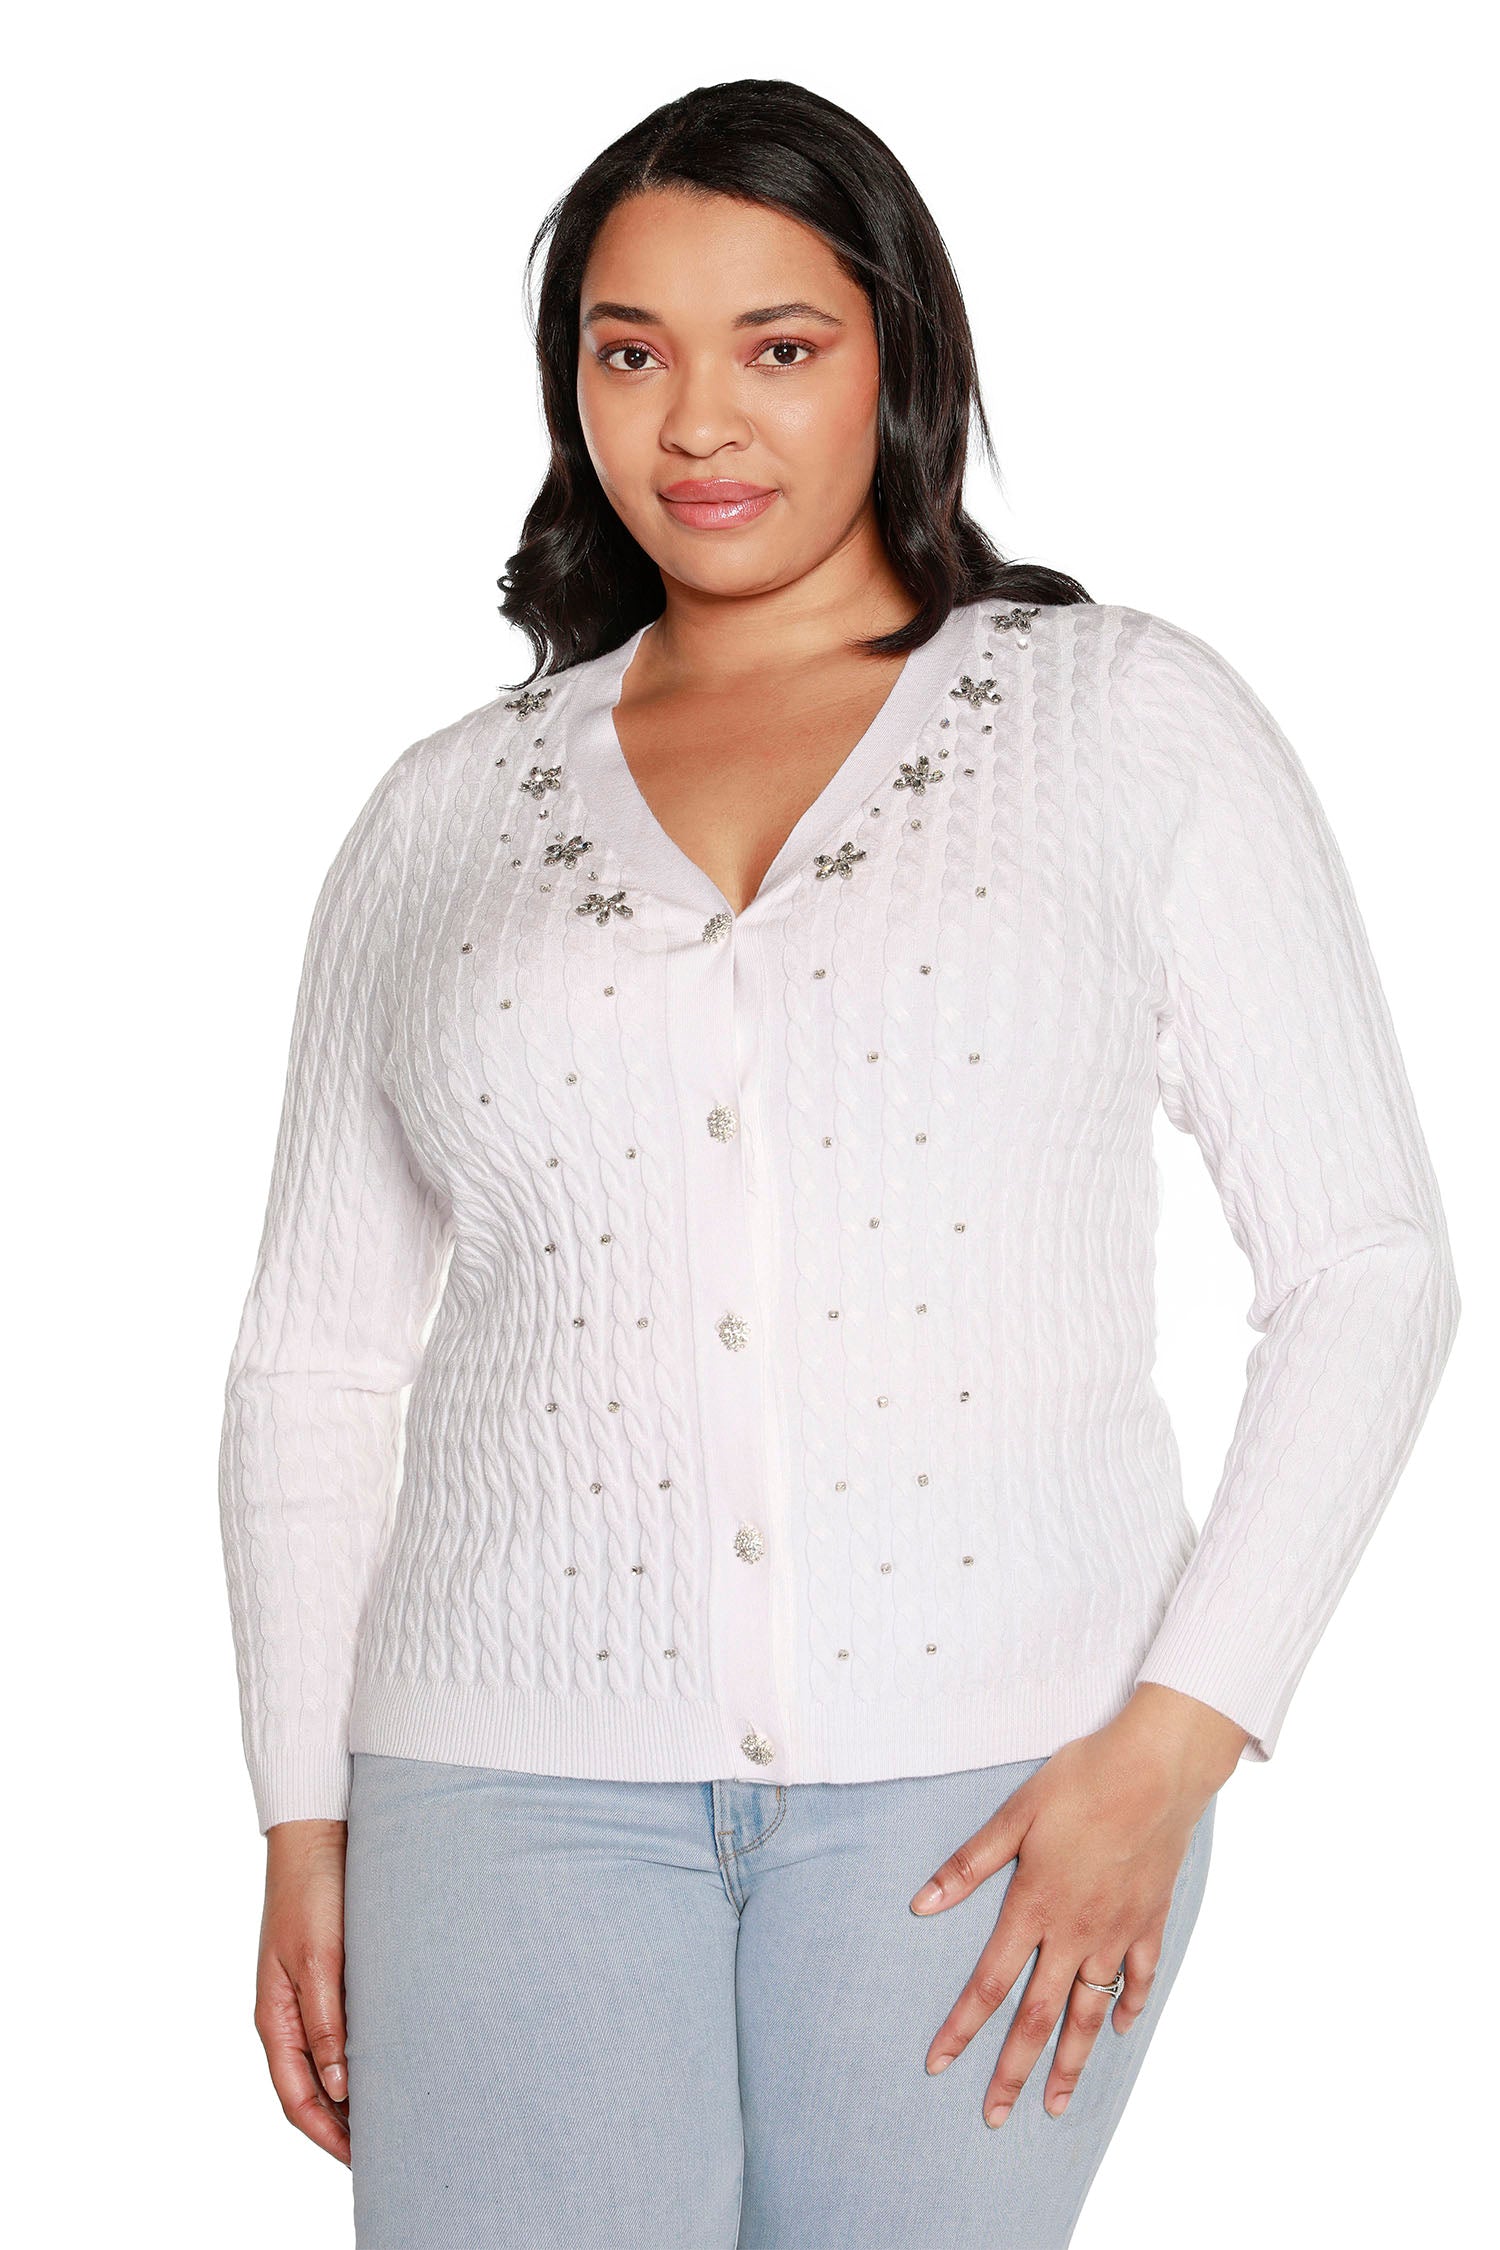 Women’s Rhinestone Embellished Delicate Cable Knit Cropped Cardigan | Curvy